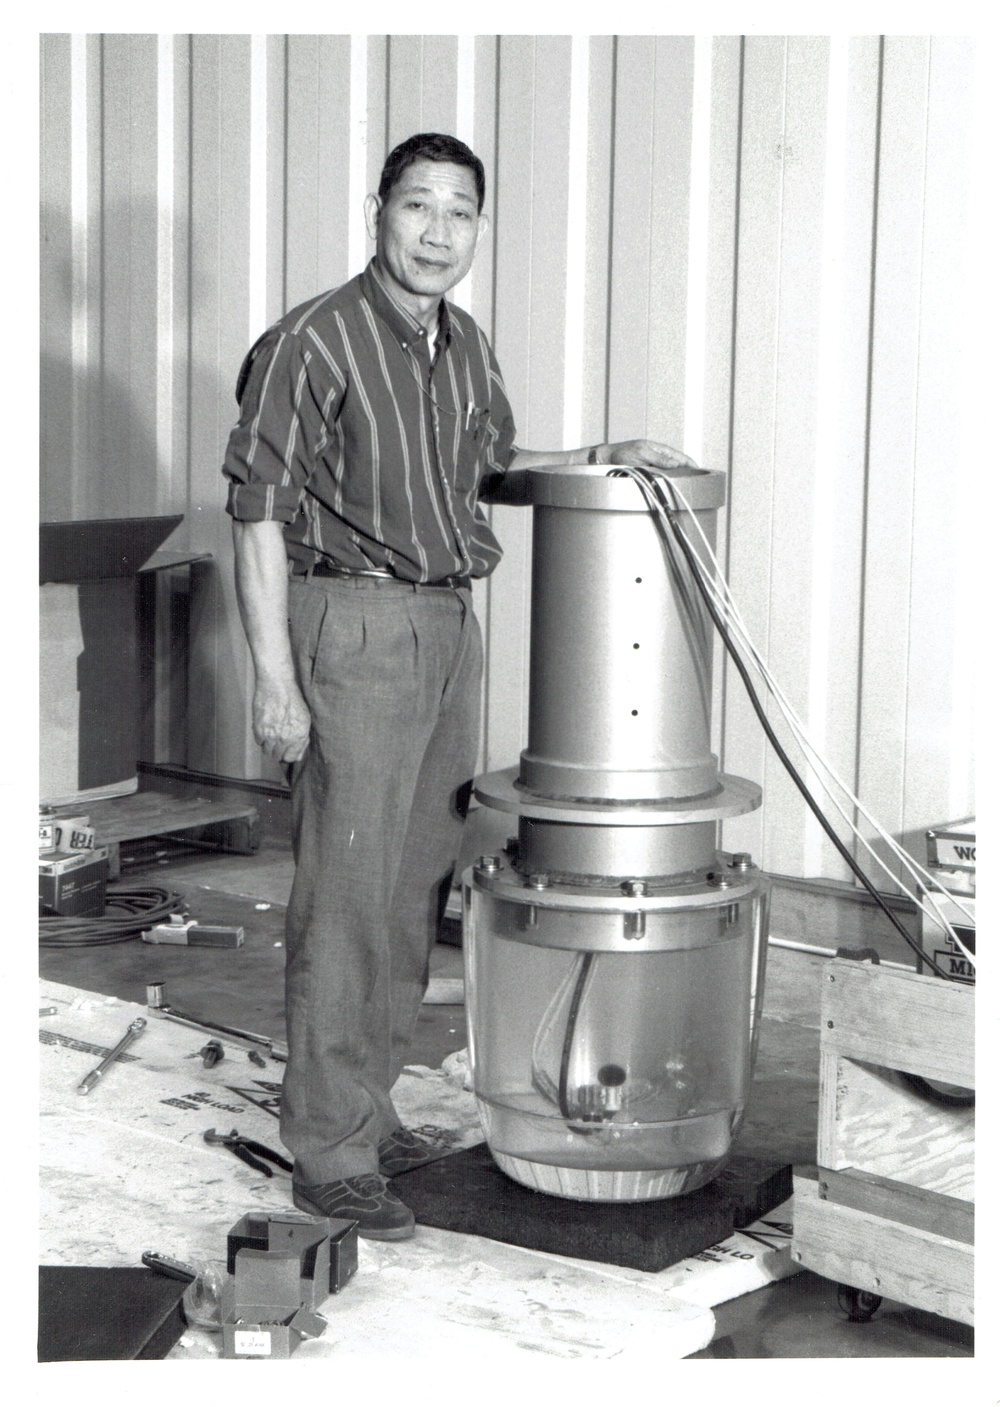 A Look Back: The Legacy of Carderock’s Dr. Young Shen